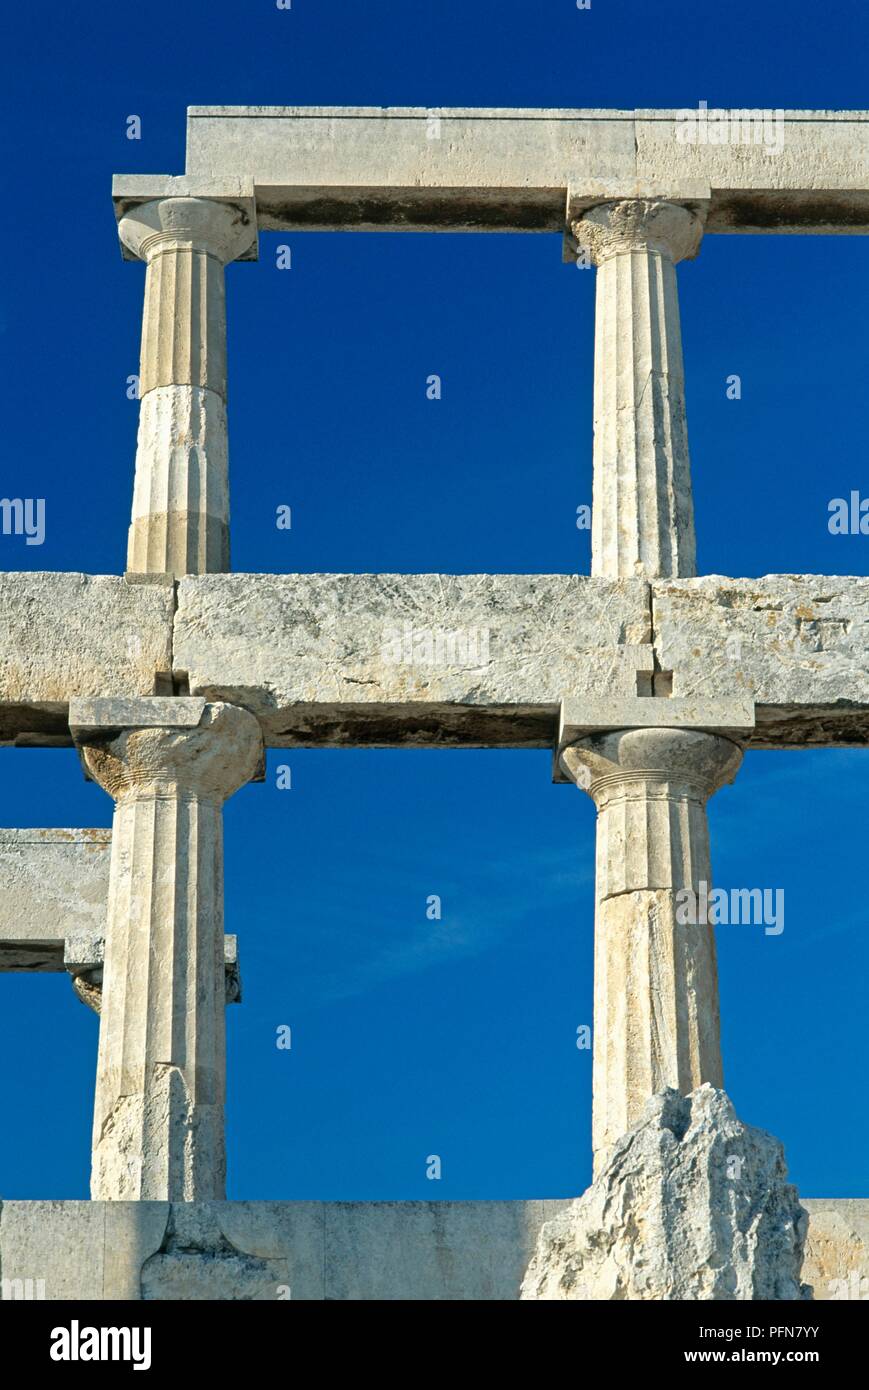 Greece, Aegina, Temple of Aphaia, two storeys of Doric columns set against clear blue sky Stock Photo